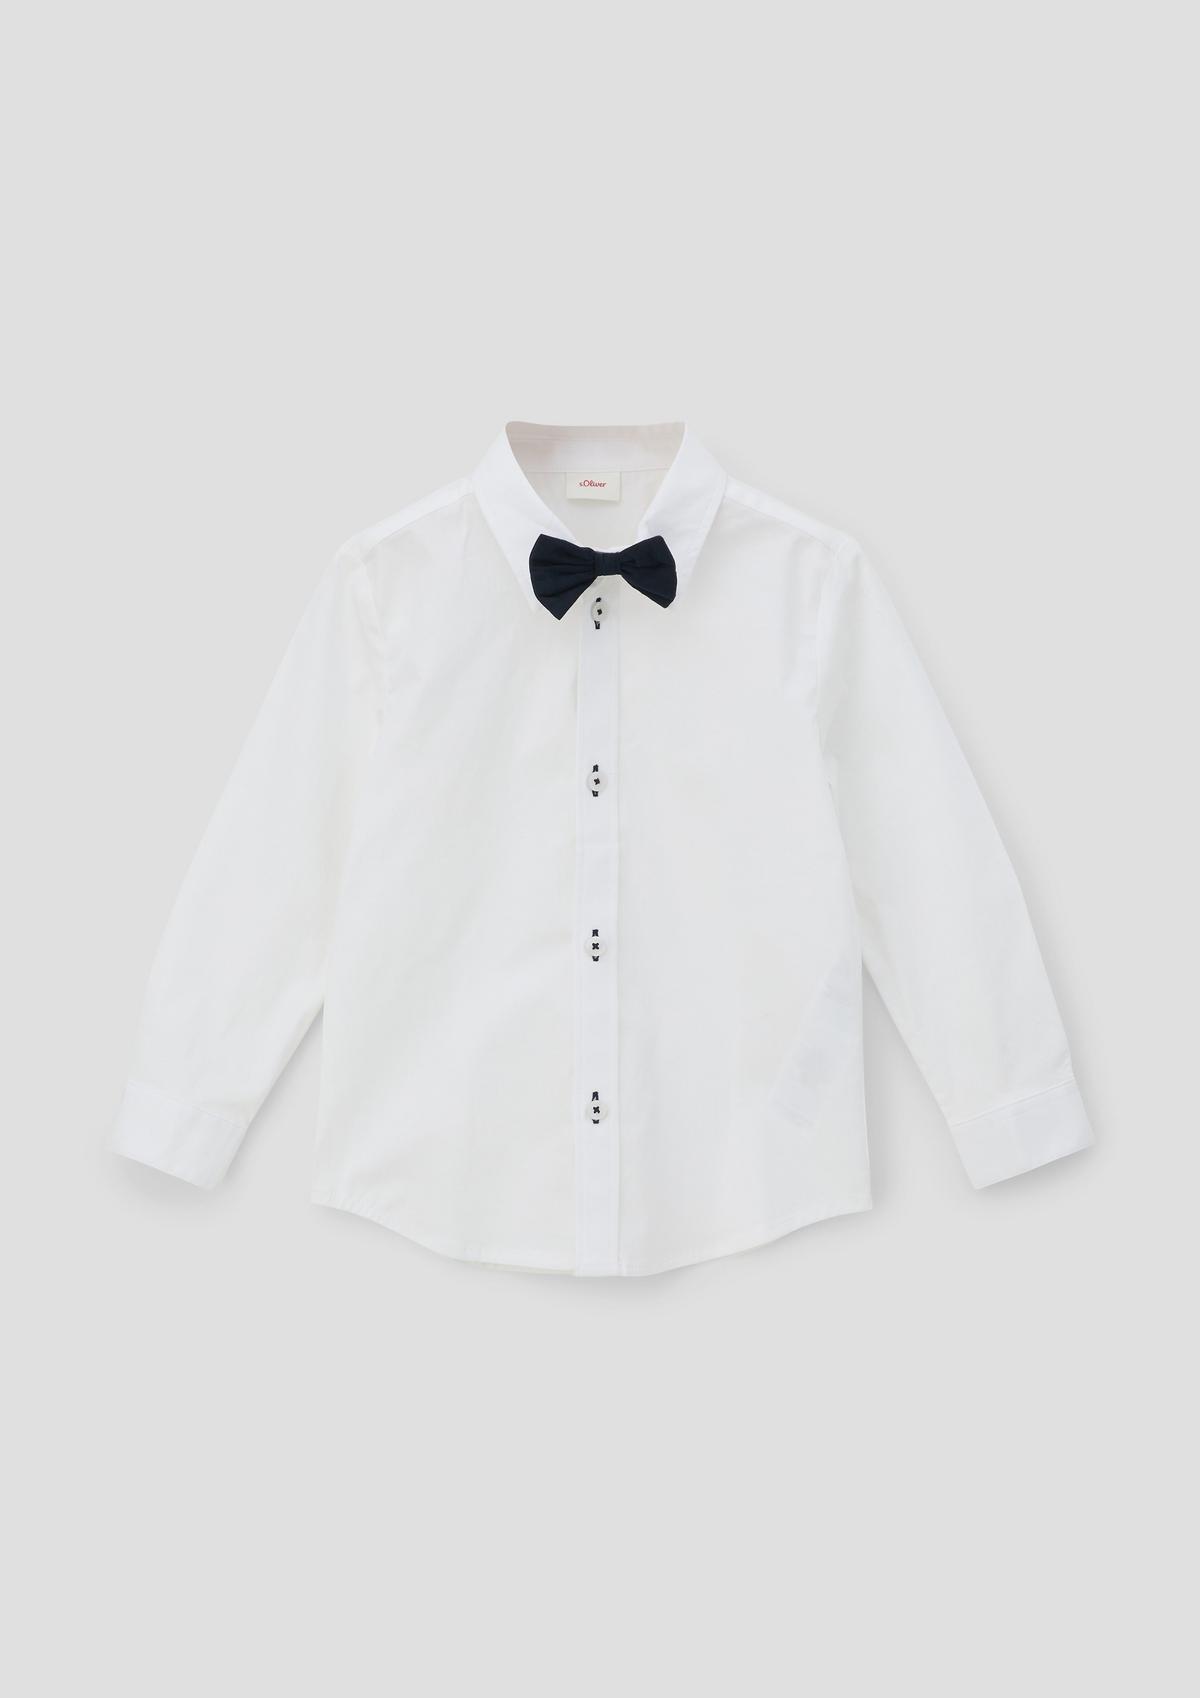 s.Oliver Poplin shirt with a detachable bow tie